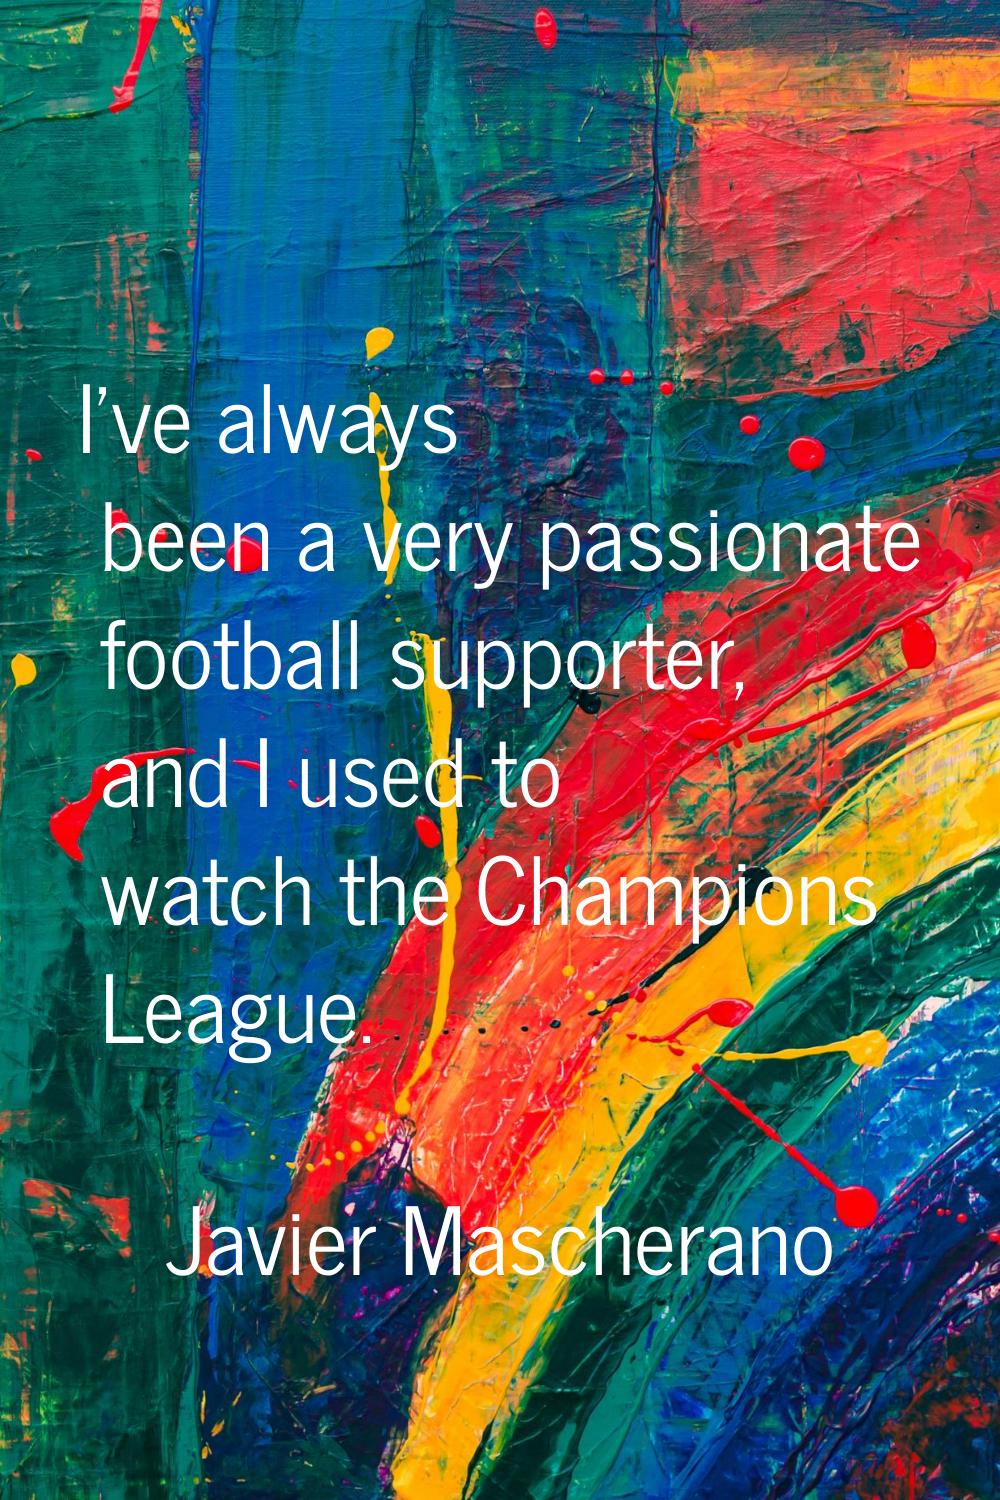 I've always been a very passionate football supporter, and I used to watch the Champions League.